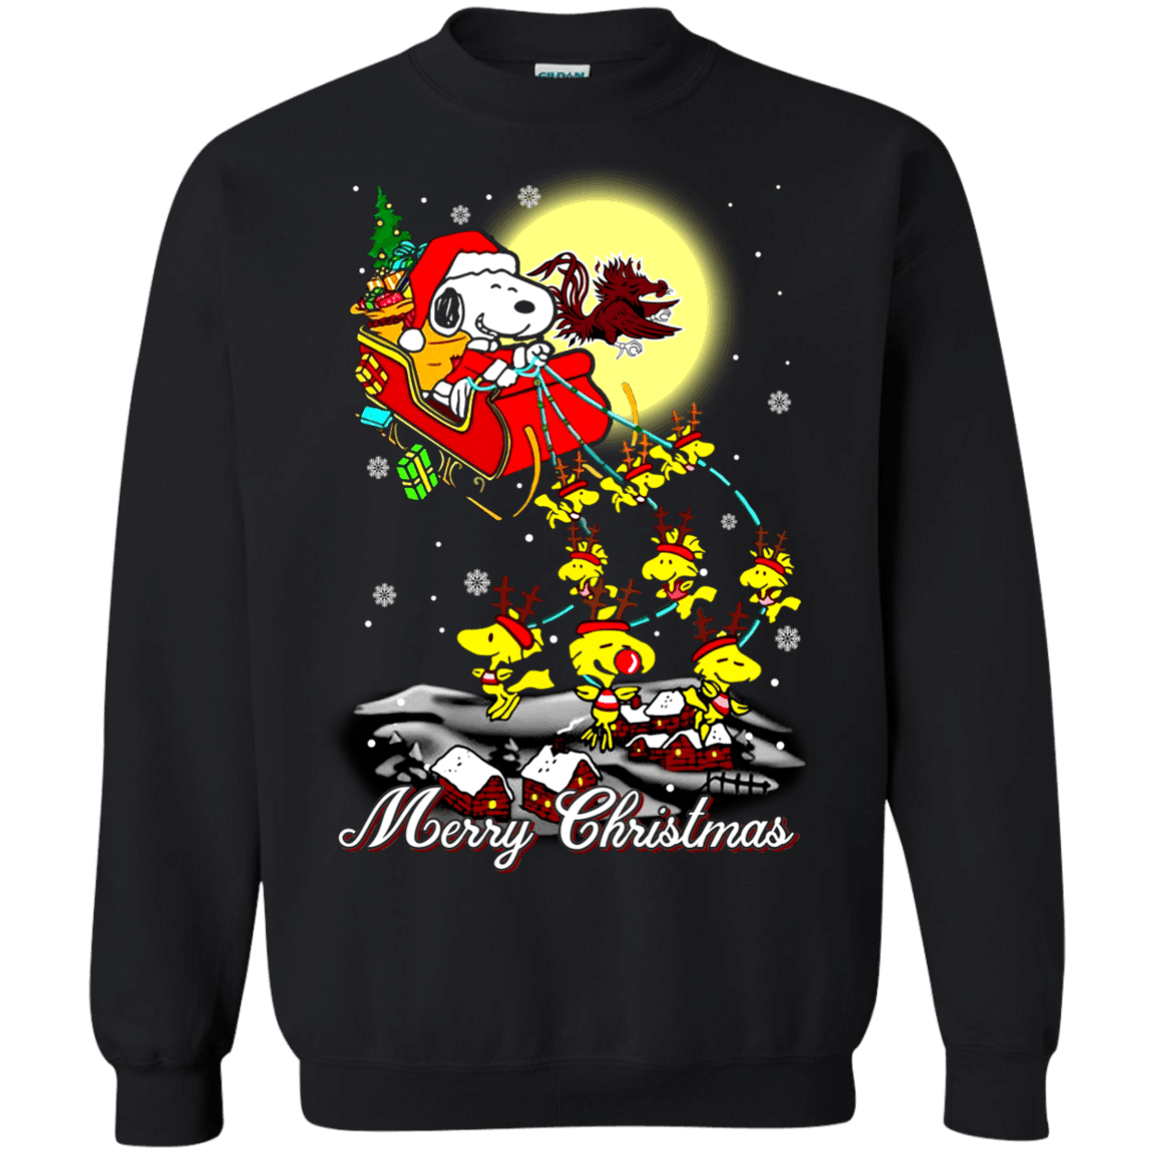 Awesome South Carolina Gamecocks Ugly Christmas Sweater 2023S Santa Claus With Sleigh And Snoopy Sweatshirts